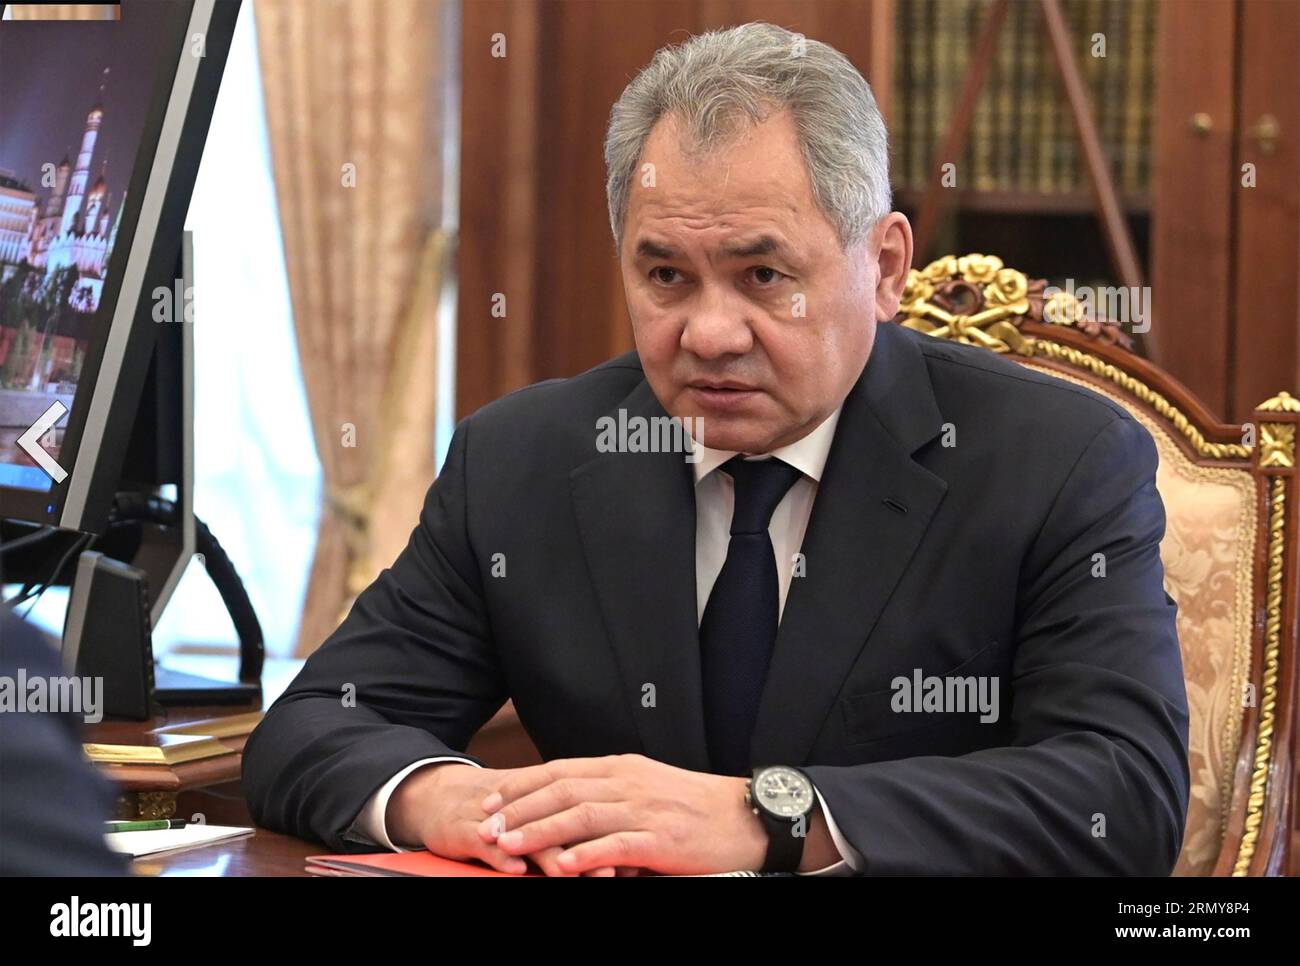 SERGEI SHOIGU Russian politician and Minister of Defence, photographed in January b2022. Stock Photo